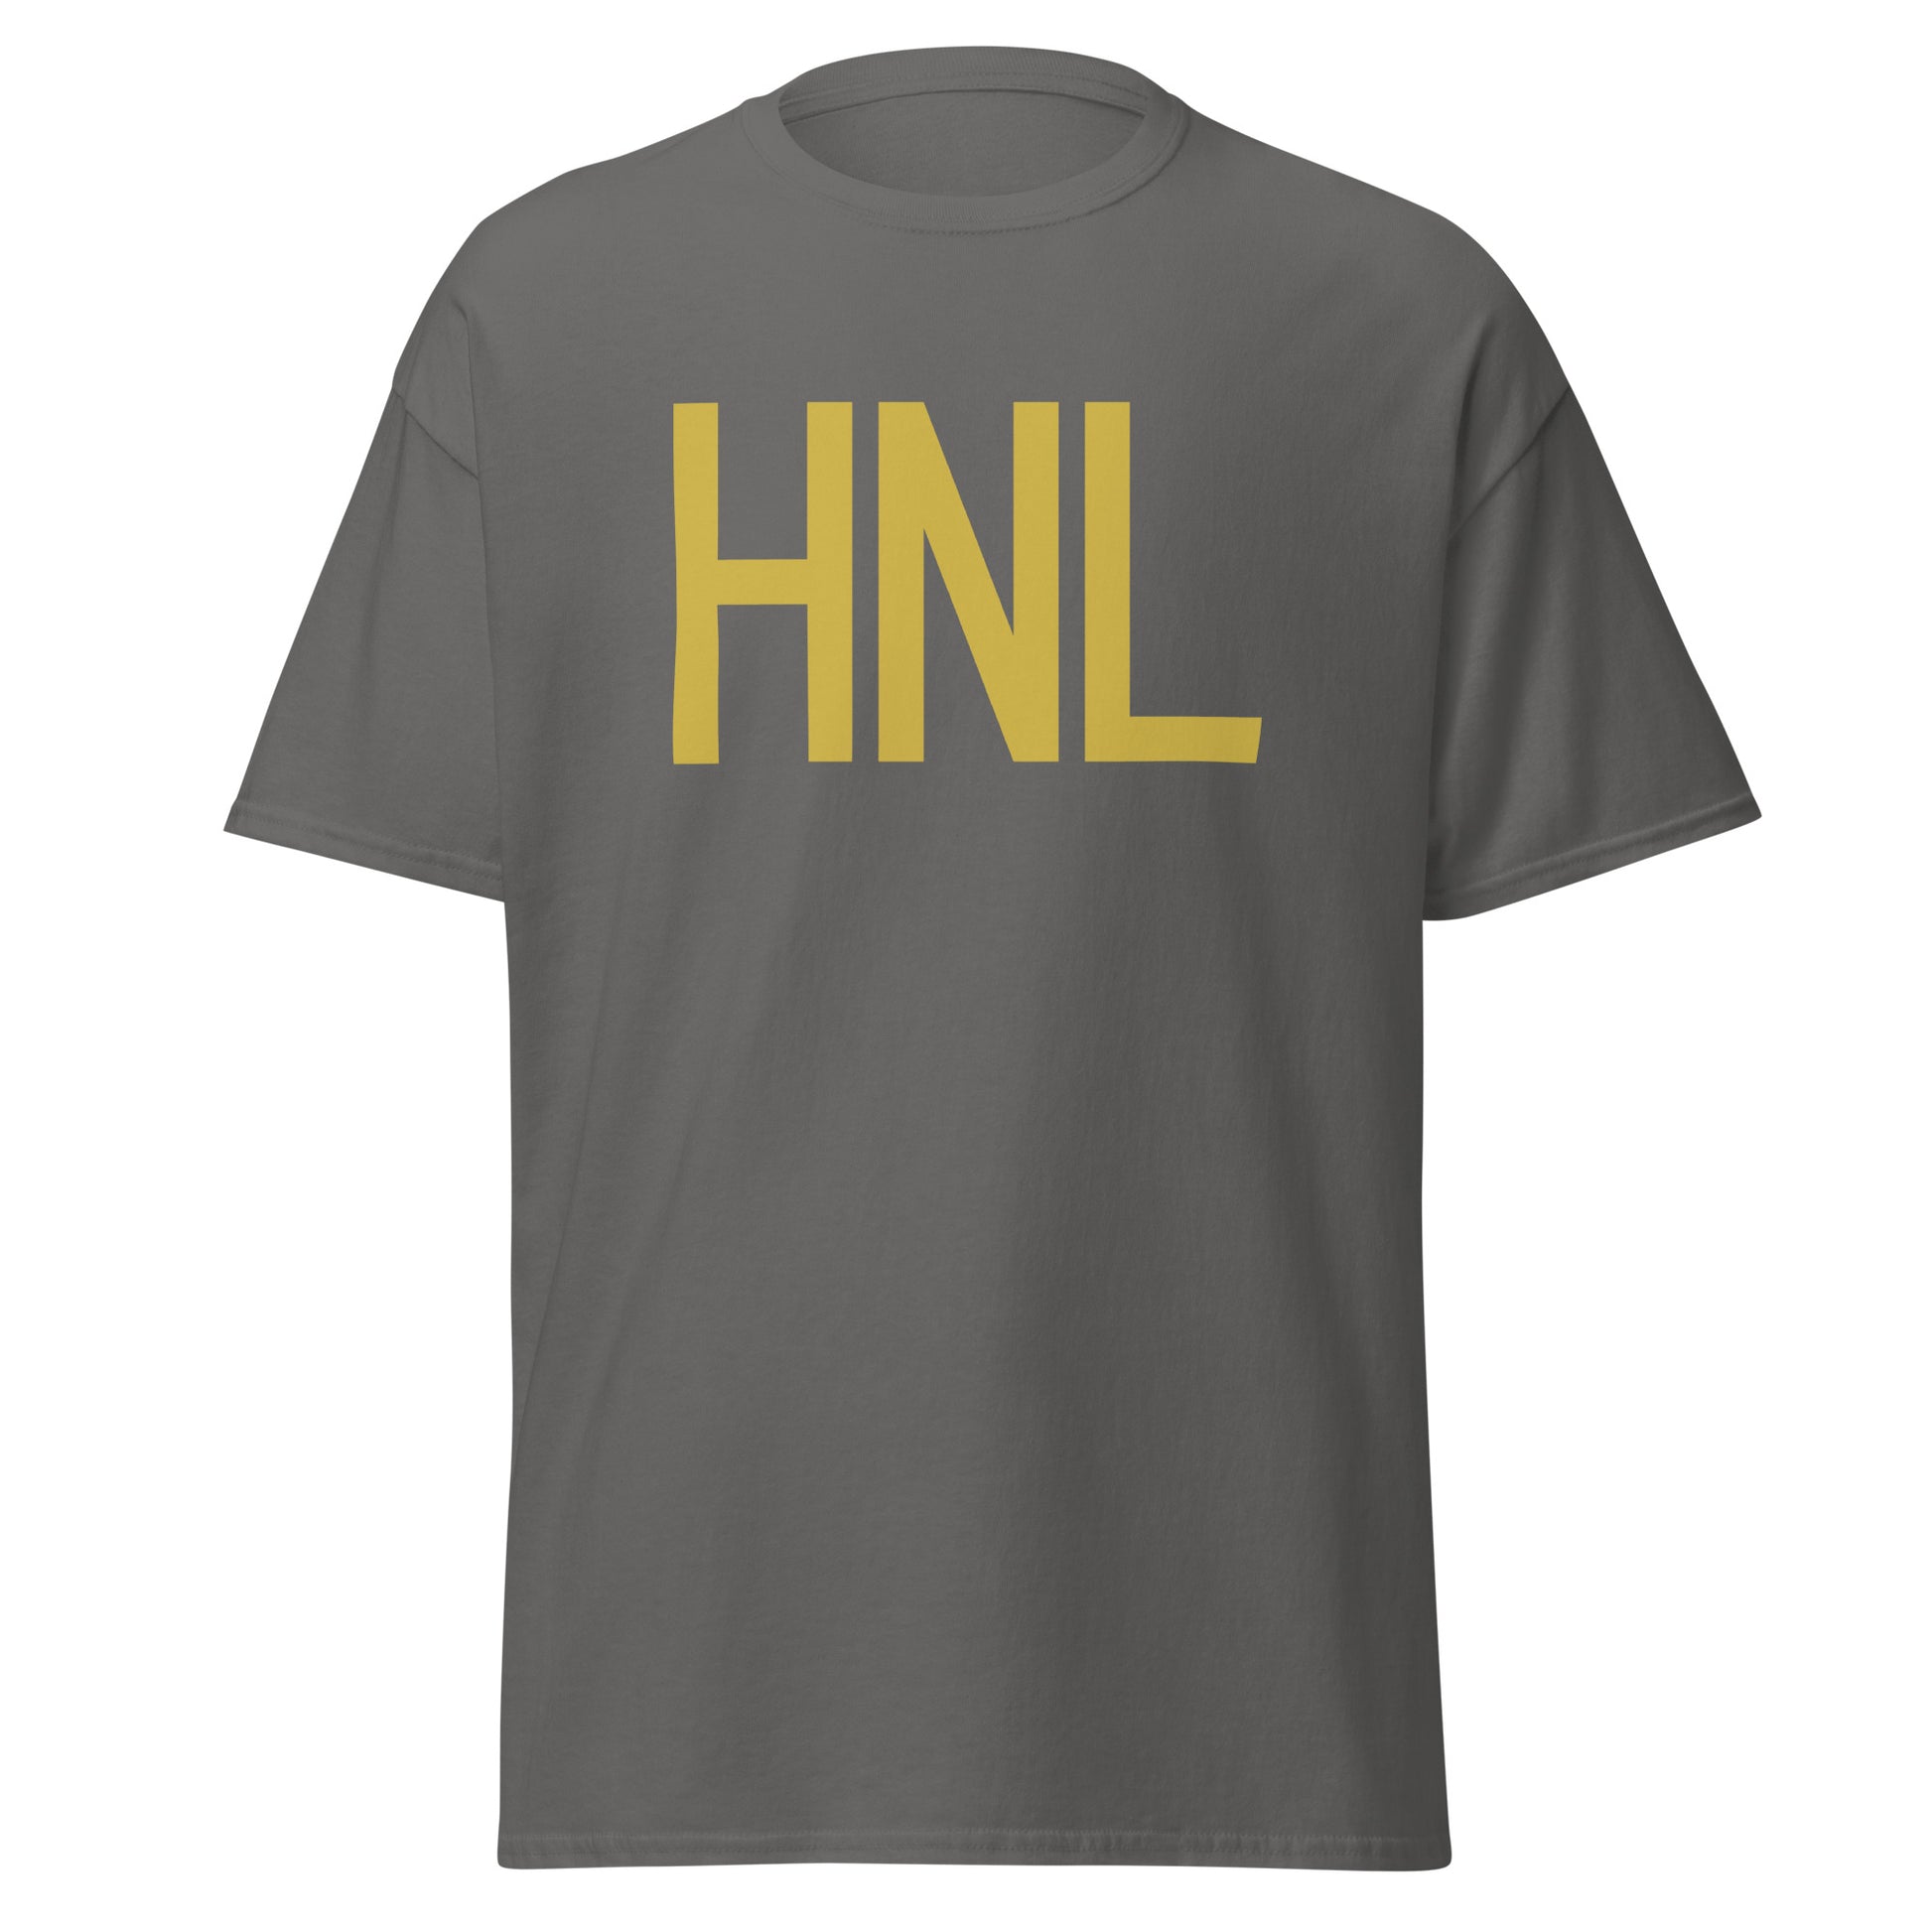 Aviation Enthusiast Men's Tee - Old Gold Graphic • HNL Honolulu • YHM Designs - Image 05